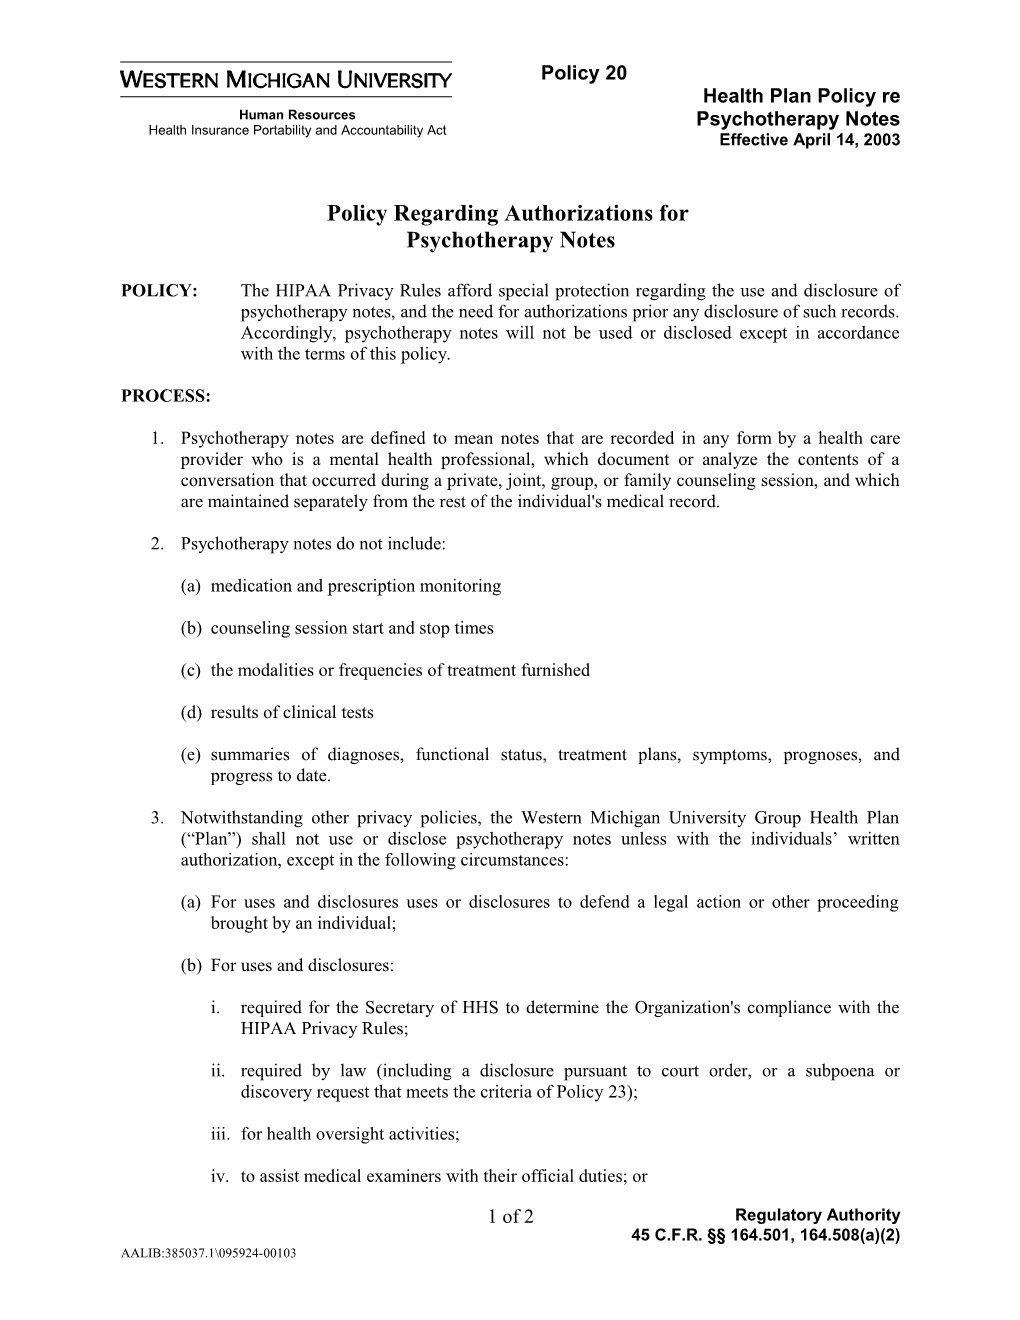 Policy Regarding Authorizations For